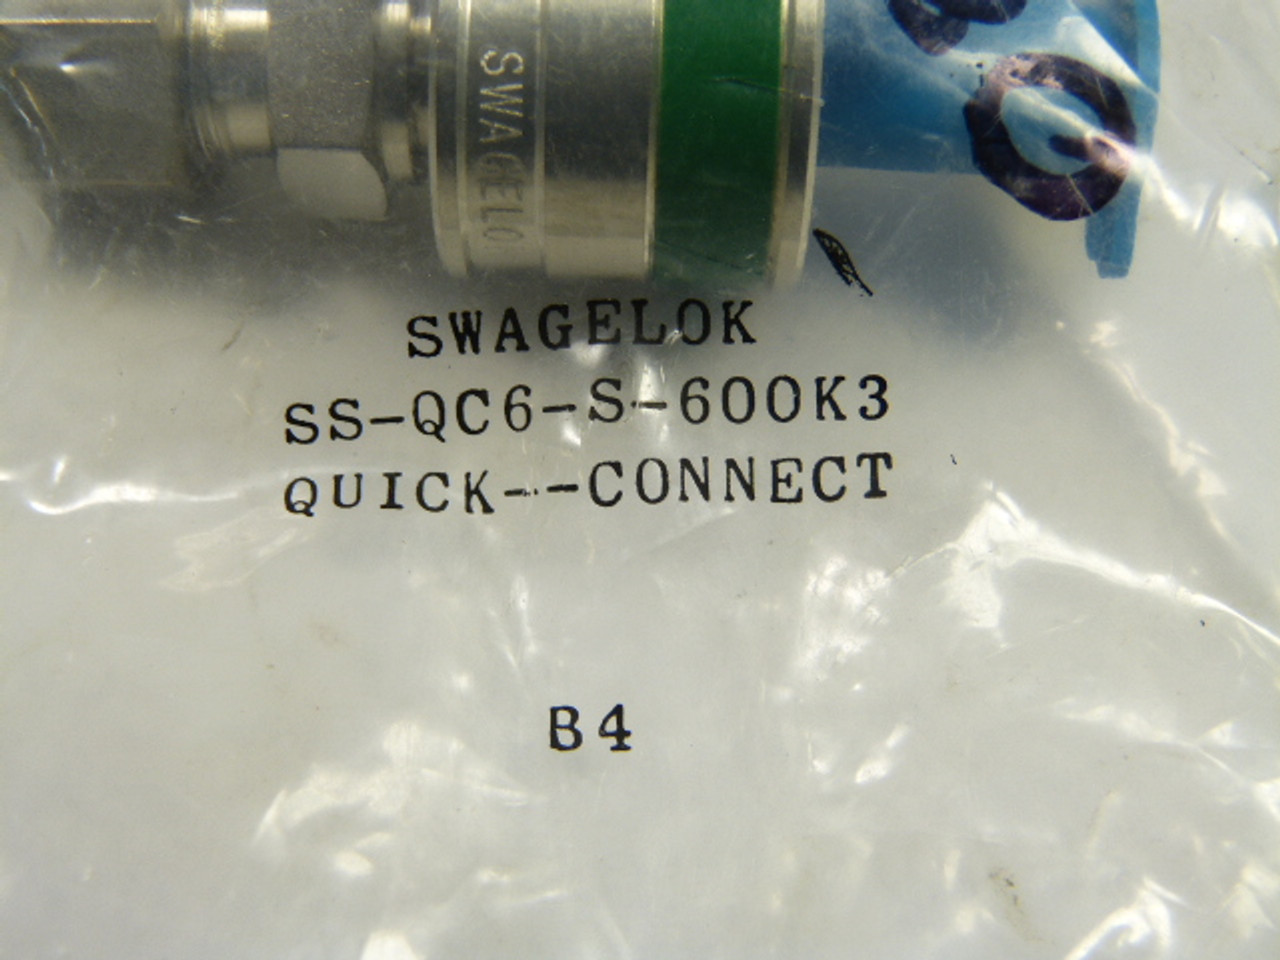 Swagelok SS-QC6-S-600K3 Quick Connect Stem 3/8" Tube Fitting ! NWB !